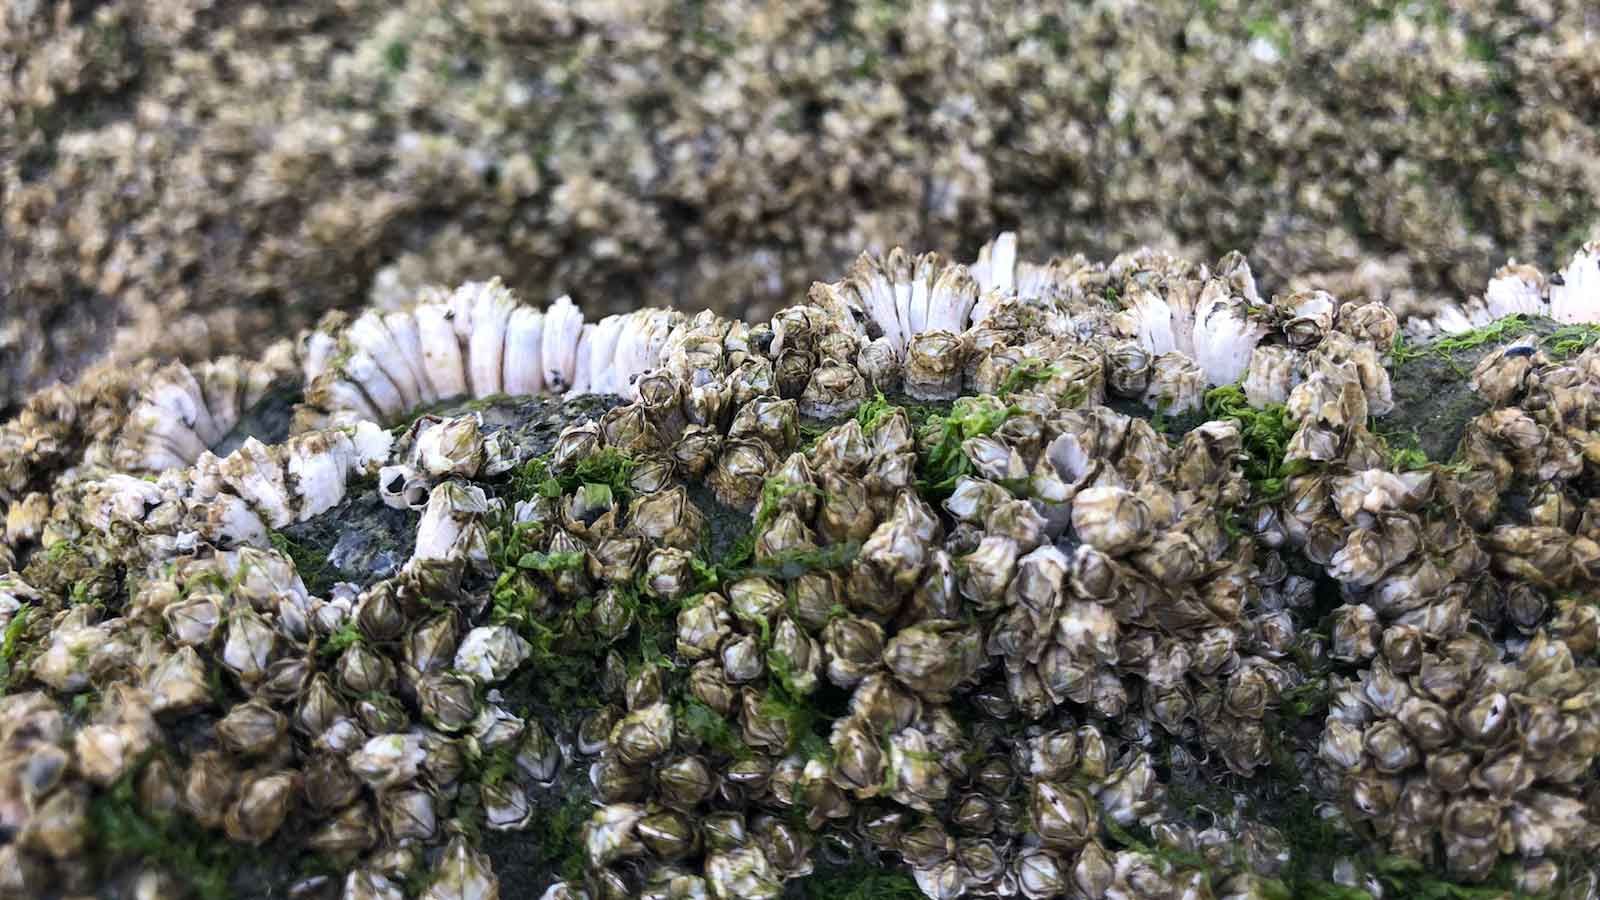 What are barnacles?